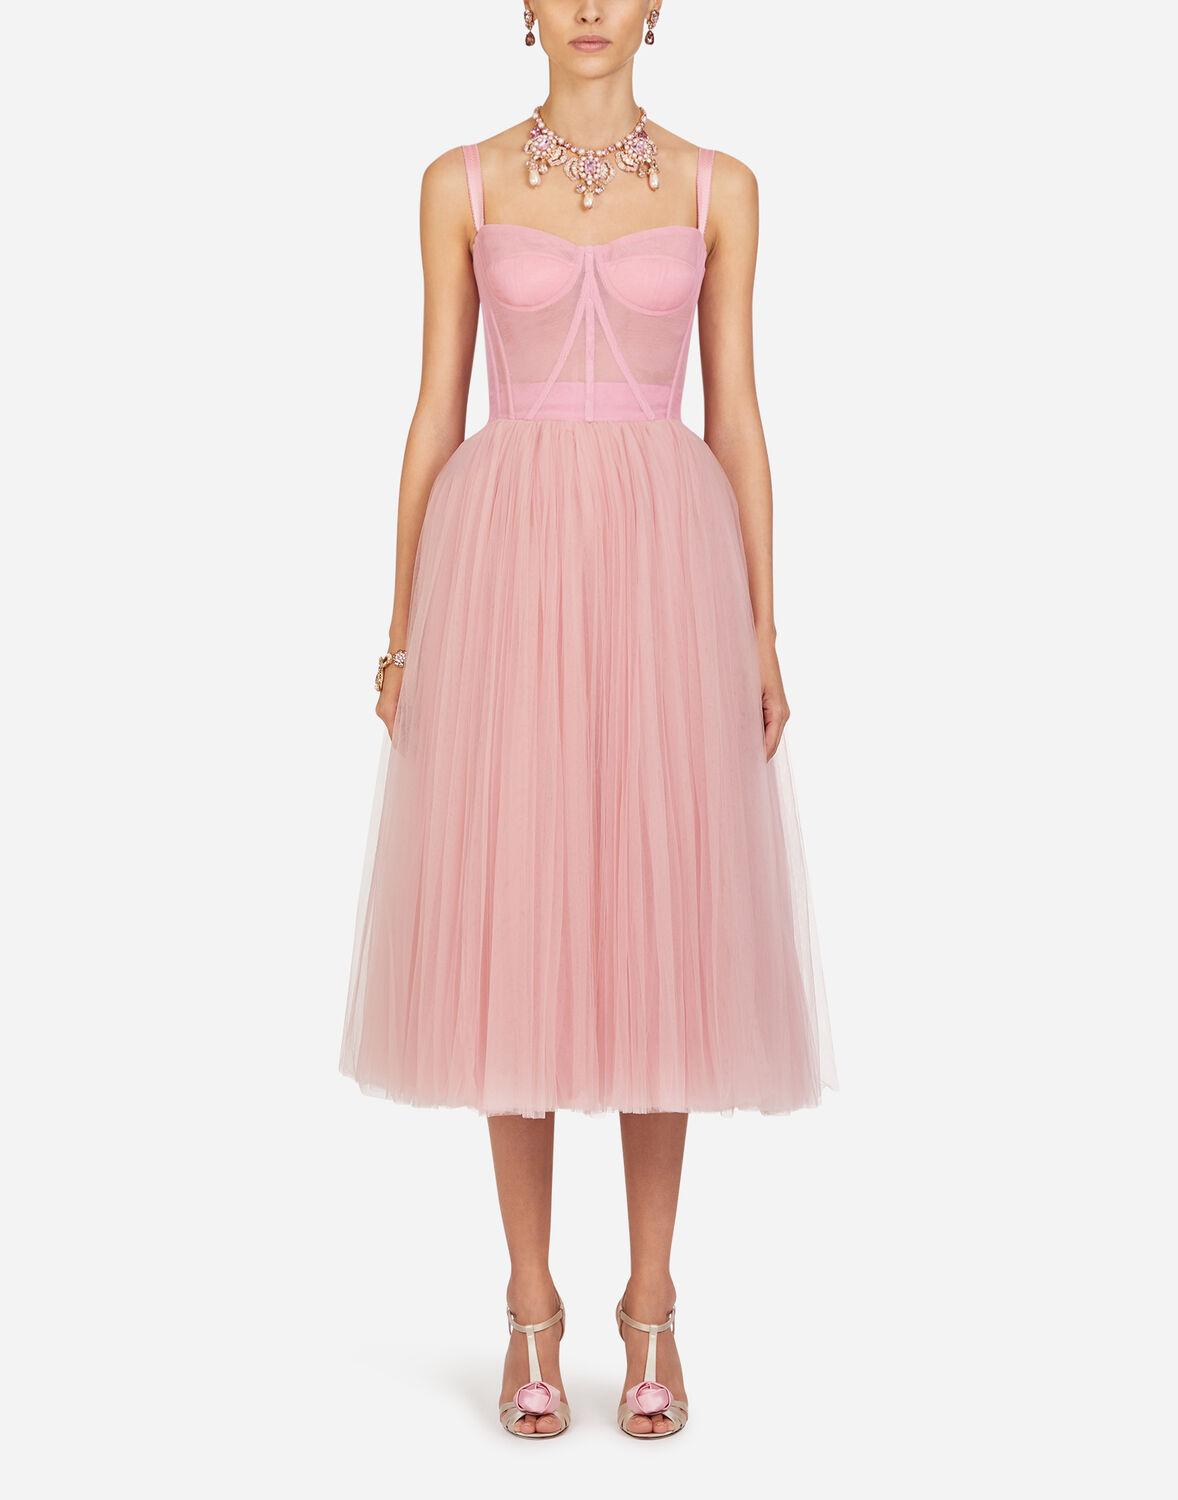 dolce and gabbana tulle dress